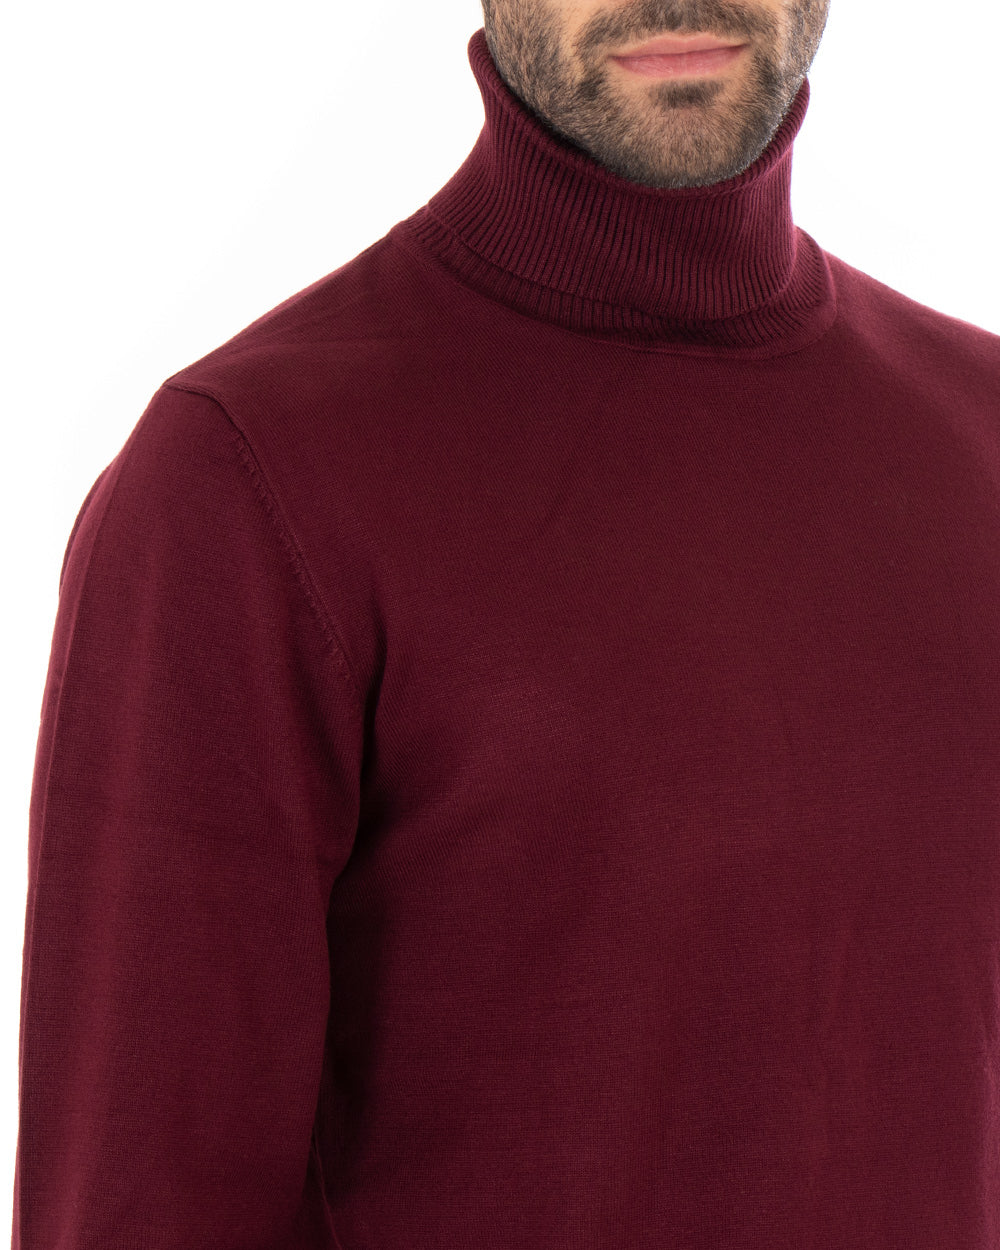 Men's Sweater Long Sleeves Elastic High Neck Solid Color Plum GIOSAL M2545A